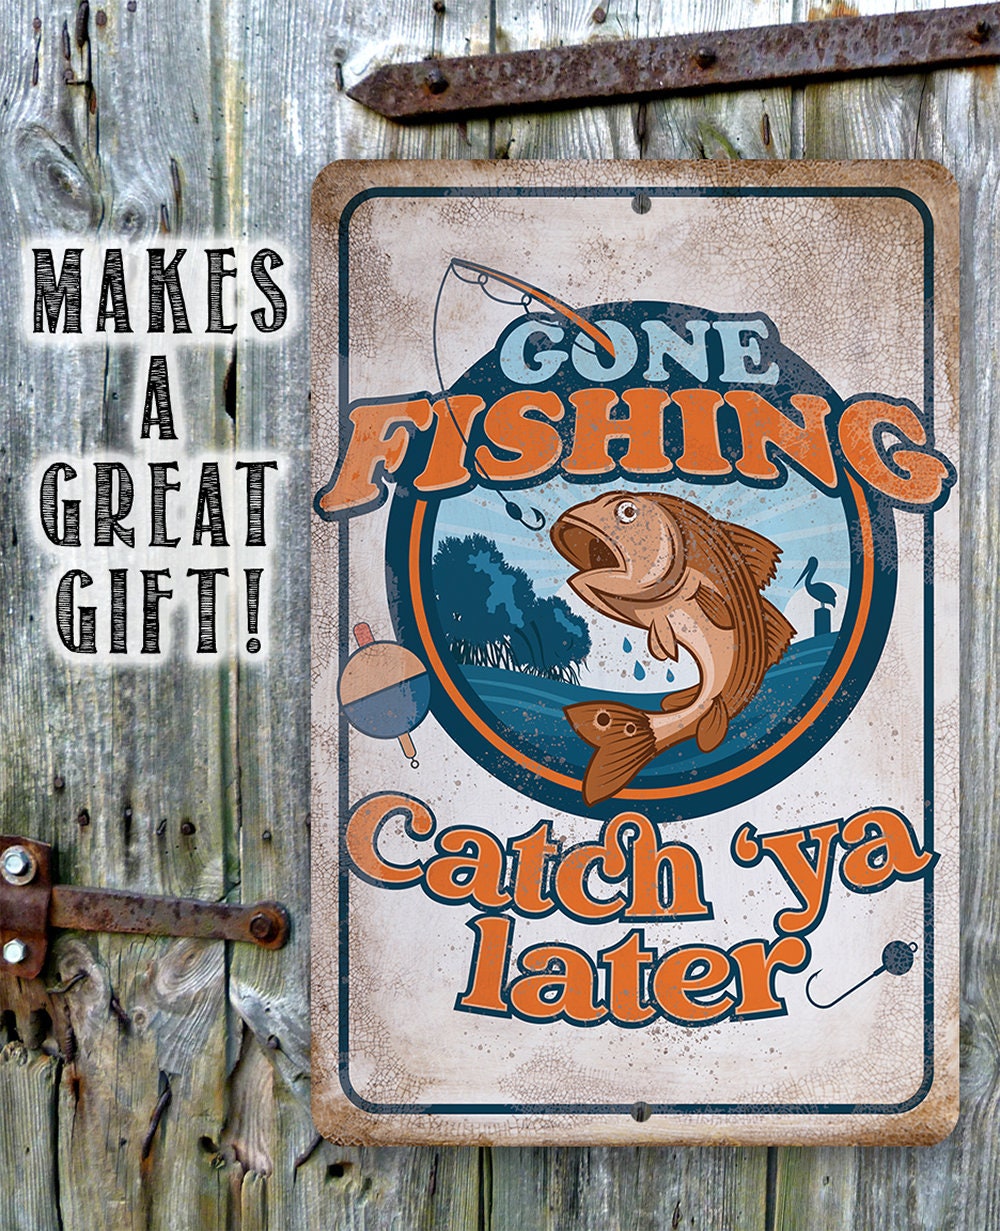 Gone Fishing Catch 'Ya Later - Metal Sign Metal Sign Lone Star Art 